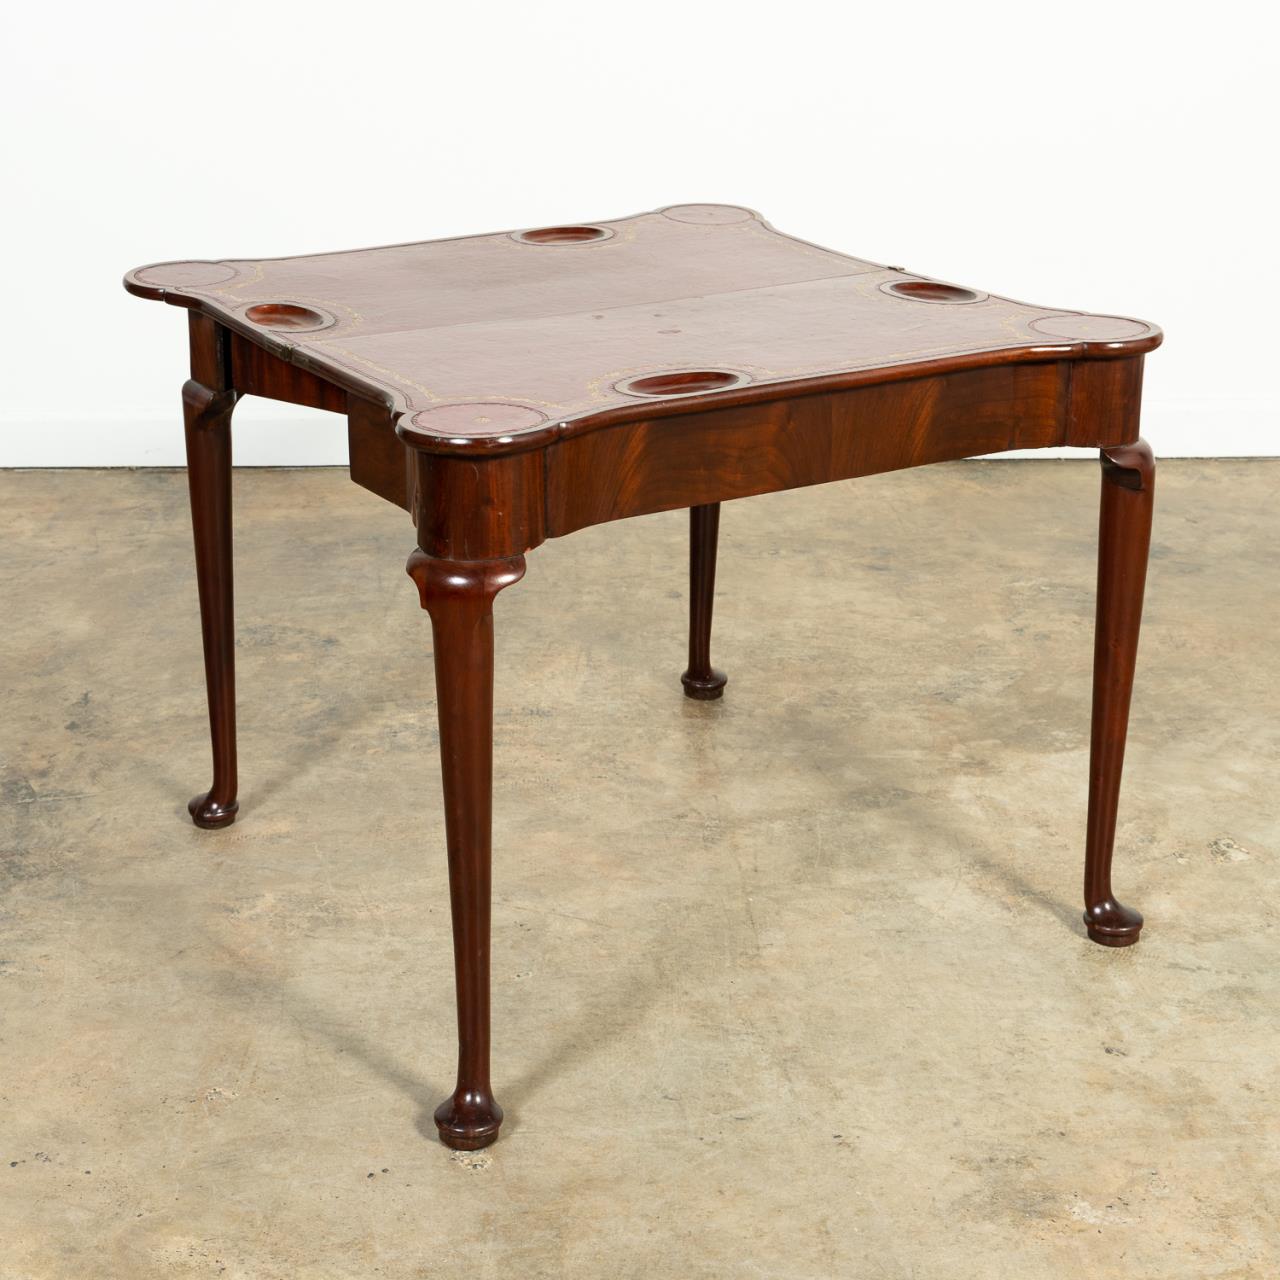  19TH C QUEEN ANNE STYLE MAHOGANY 35965c